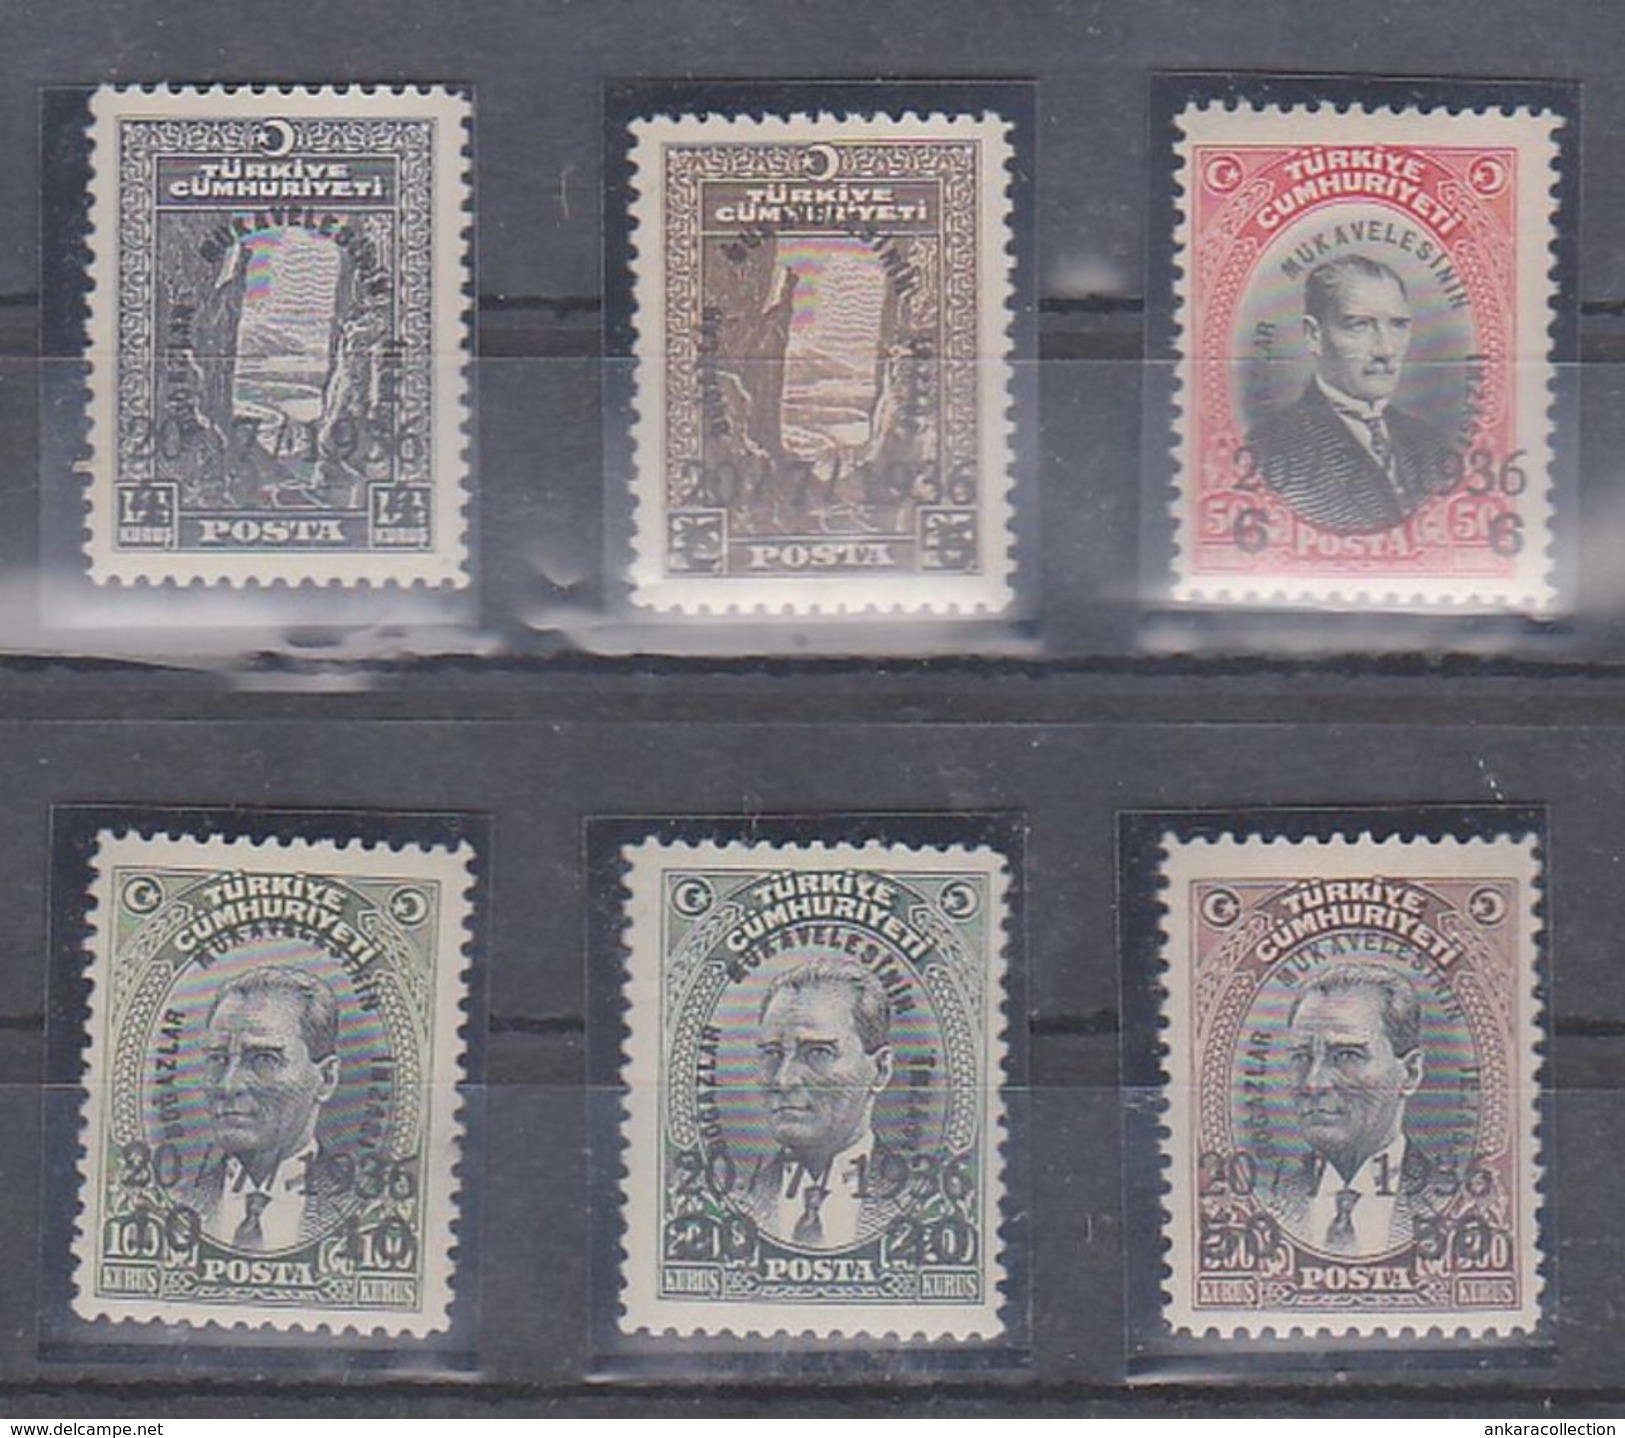 AC - TURKEY STAMP - SURCHARGED COMMEMORATIVE STAMPS FOR THE SIGNATURE OF THE STRAITS SETTLEMENTS MNH 26 OCTOBER 1936 - Ungebraucht